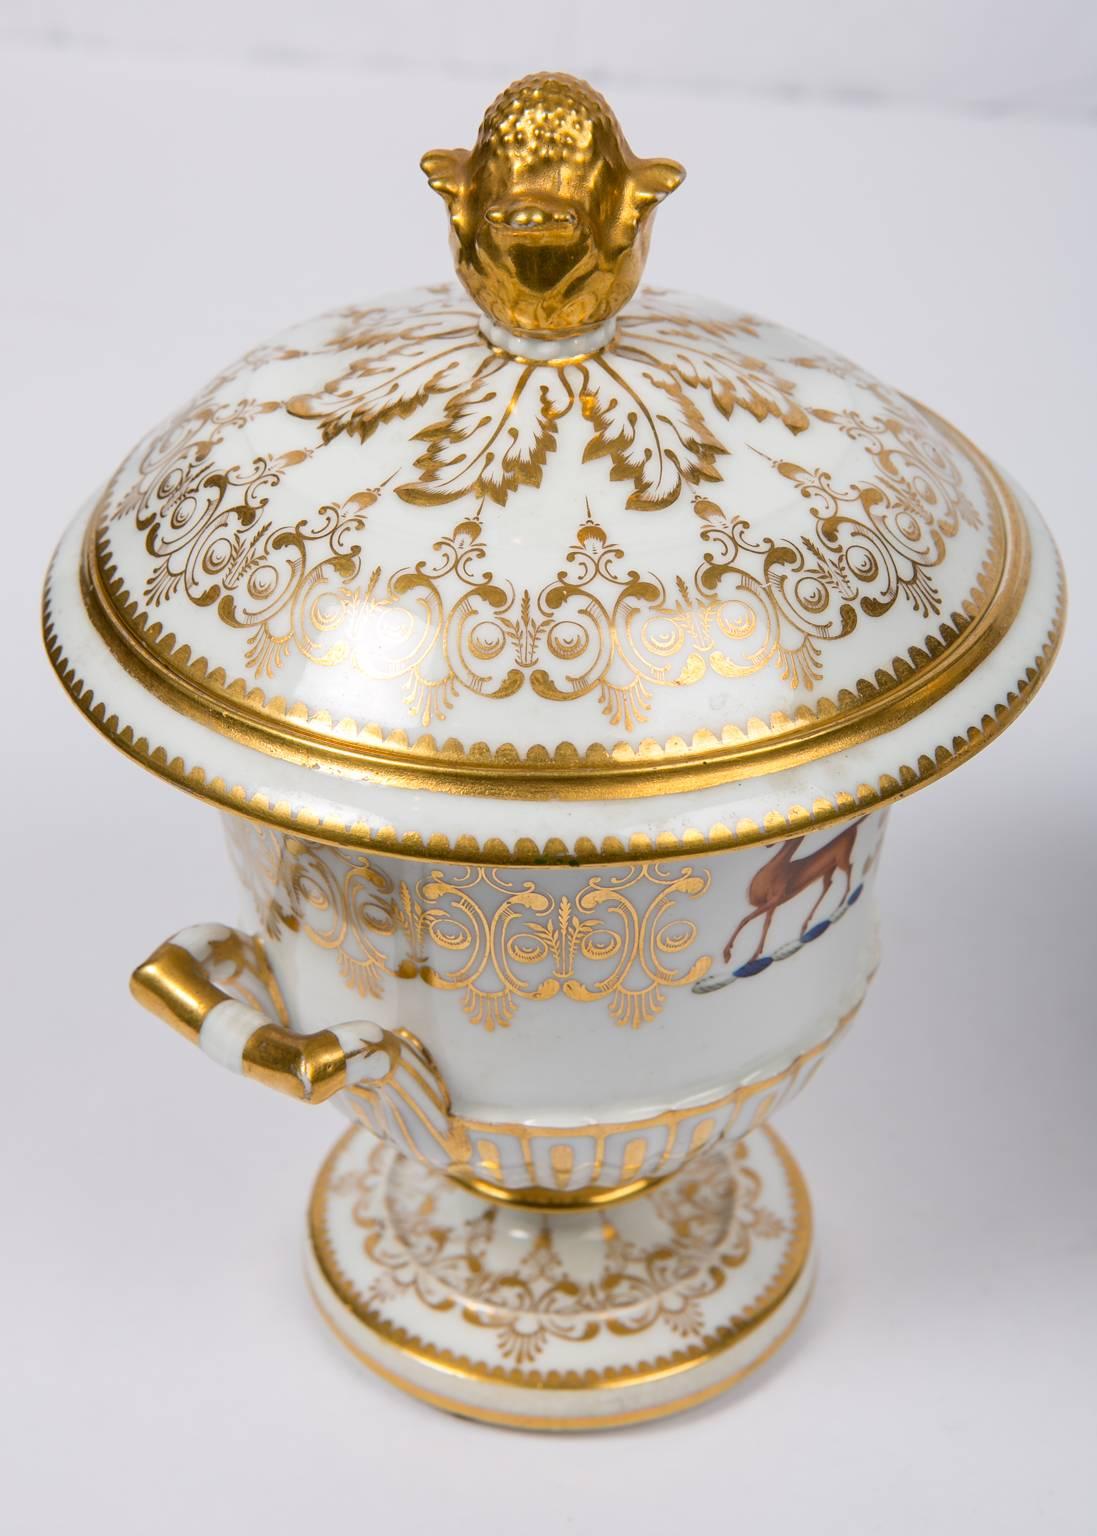 Porcelain Pair of Tureens with Armorial Crests